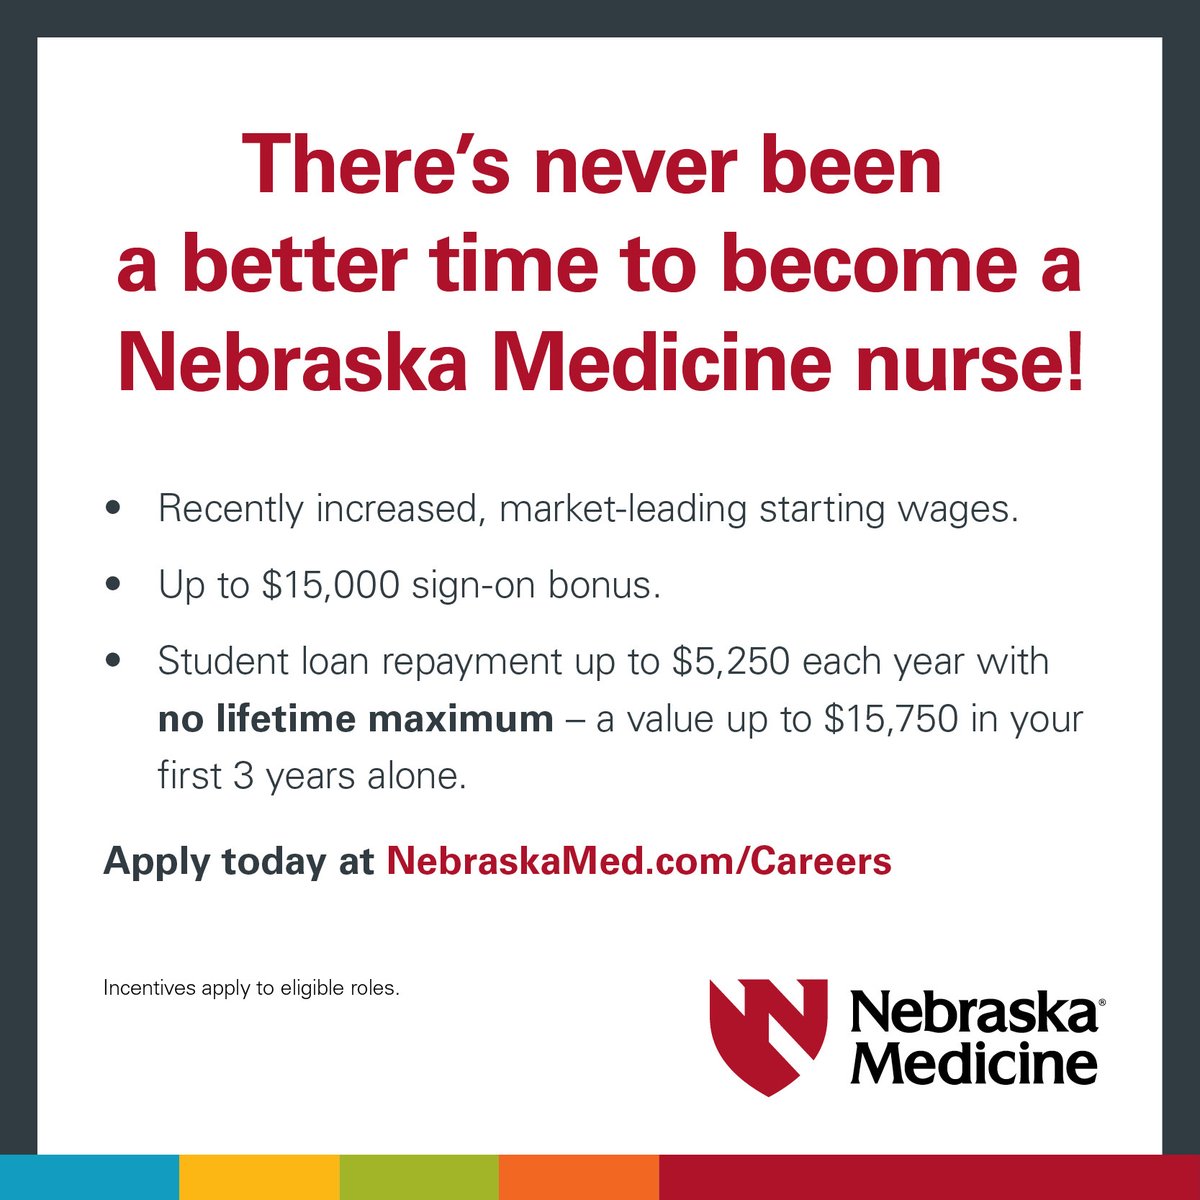 Ready to launch your nursing career? Join us and discover a supportive team, endless growth opportunities and an unmatched incentive package. Not quite ready to apply? Contact a recruiter at Recruiting@NebraskaMed.com to learn more. @NebraskaDoctors